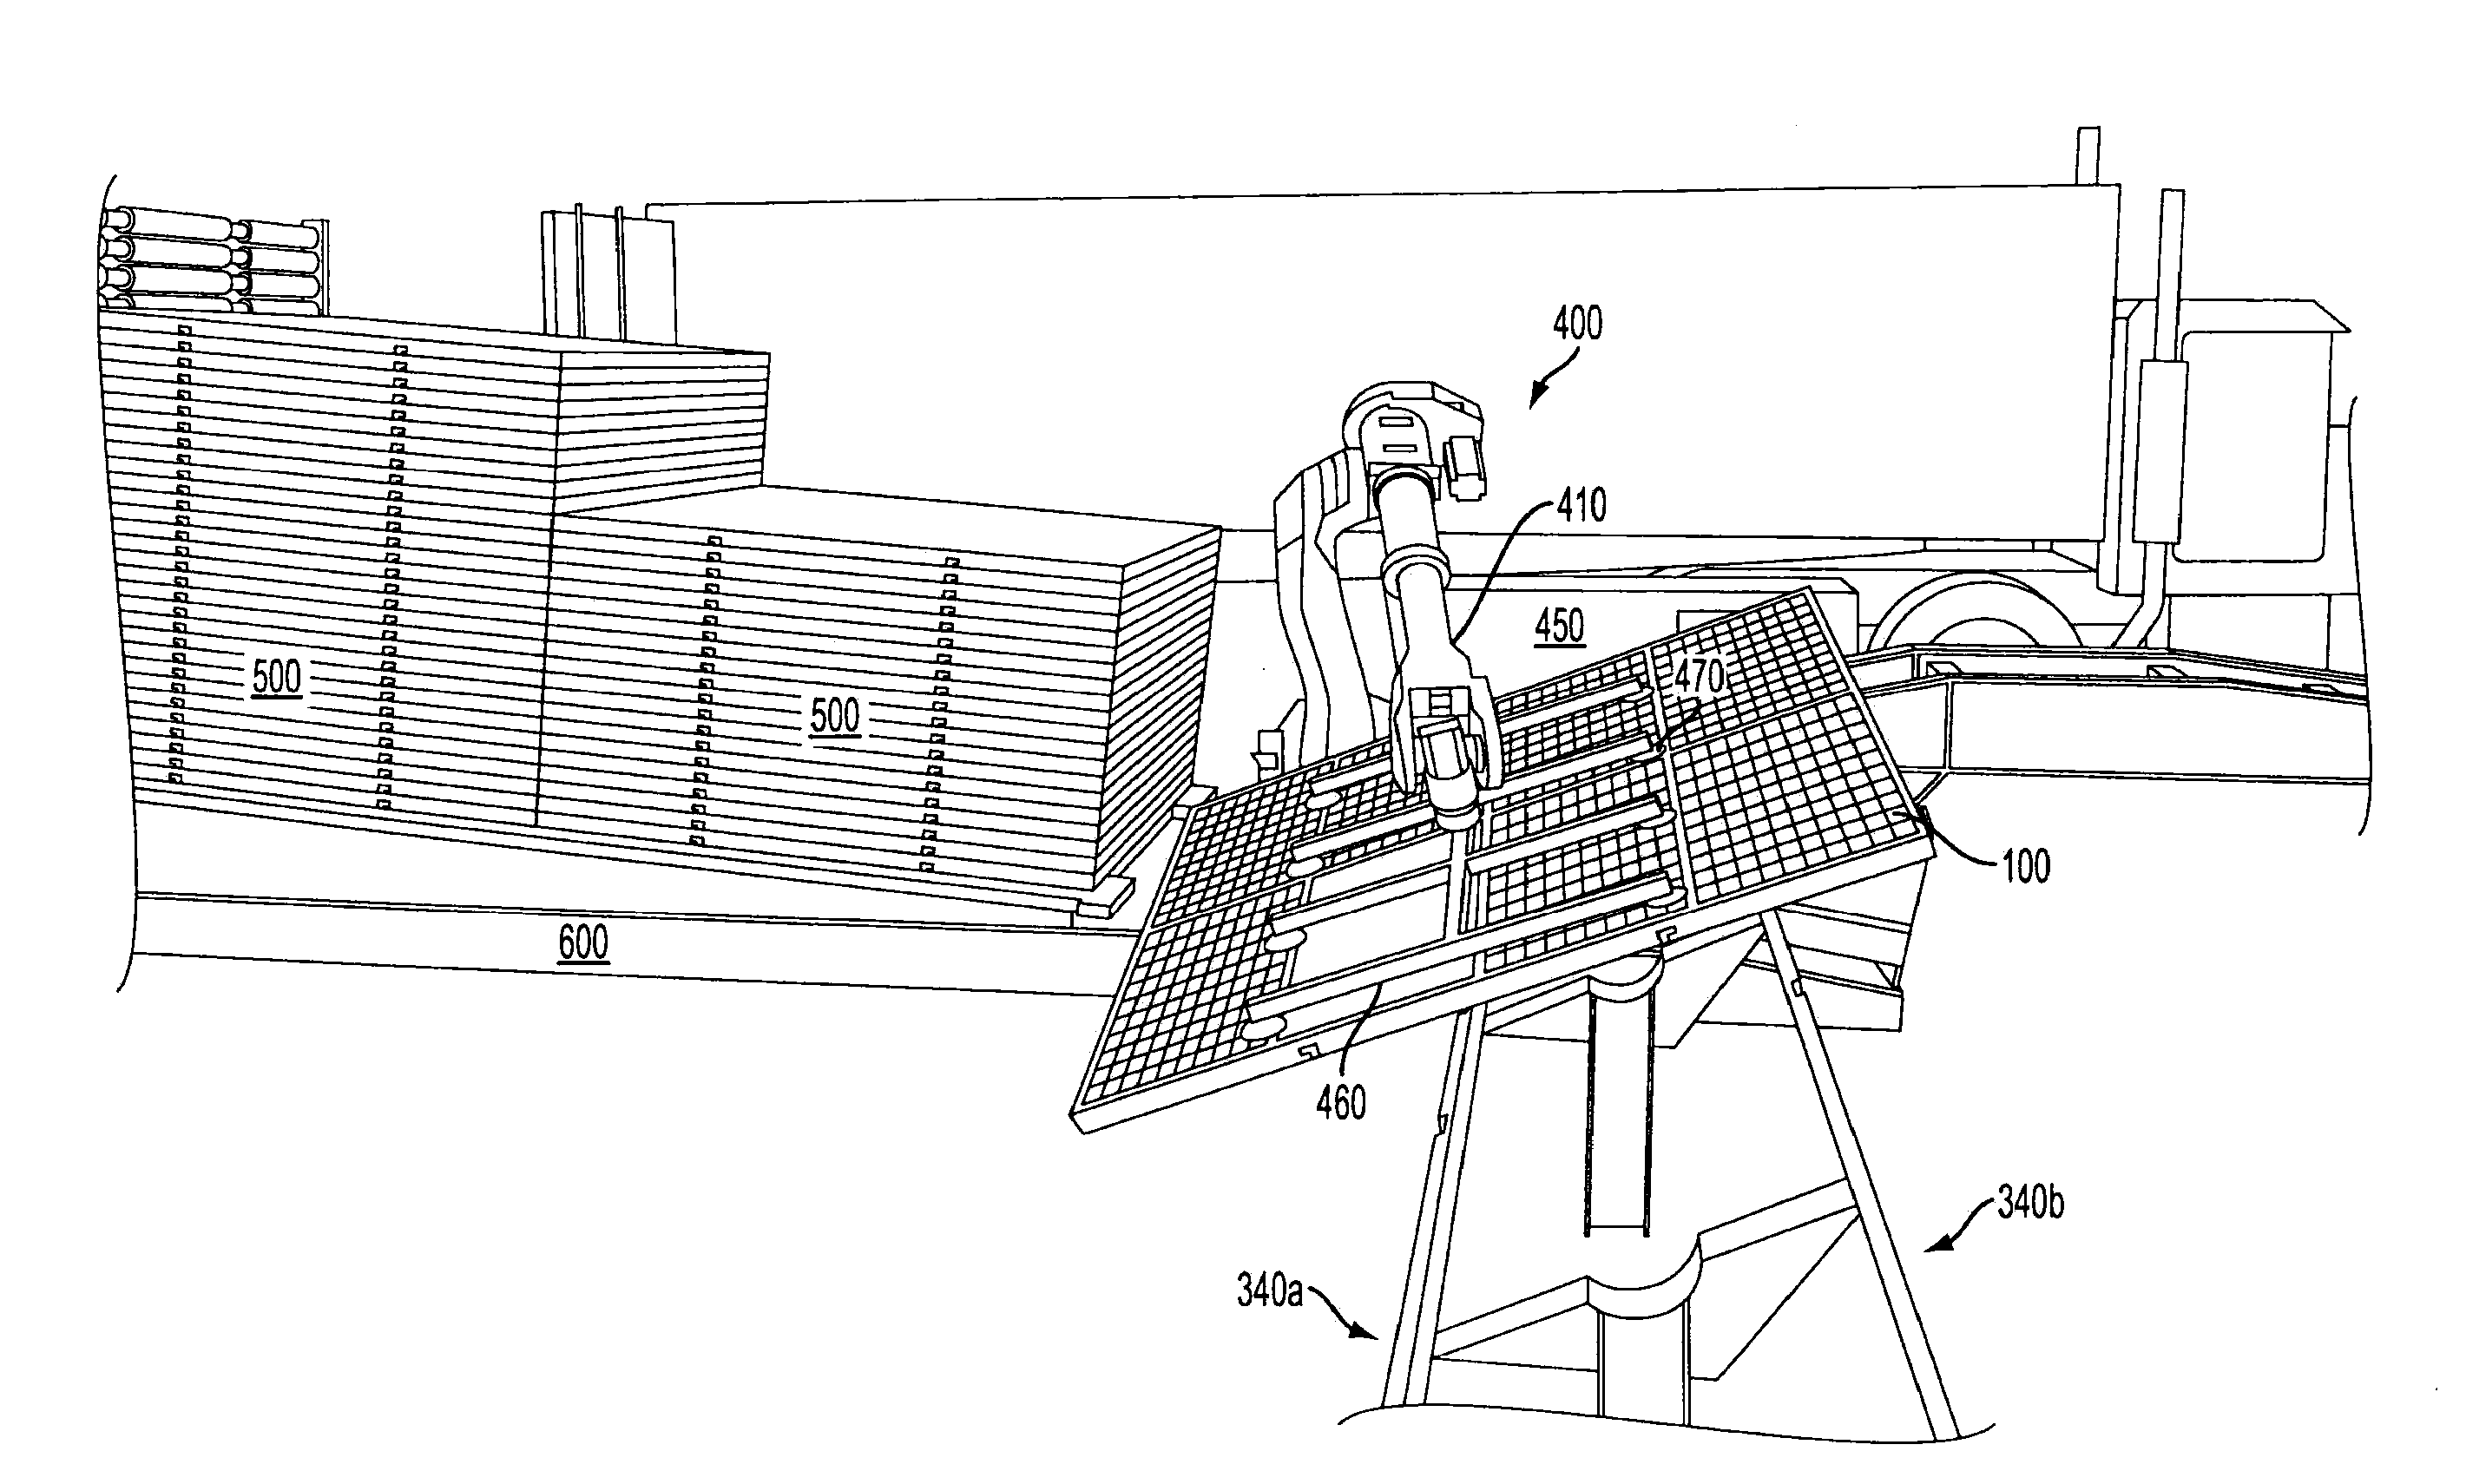 Automated installation system for and method of deployment of photovoltaic solar panels